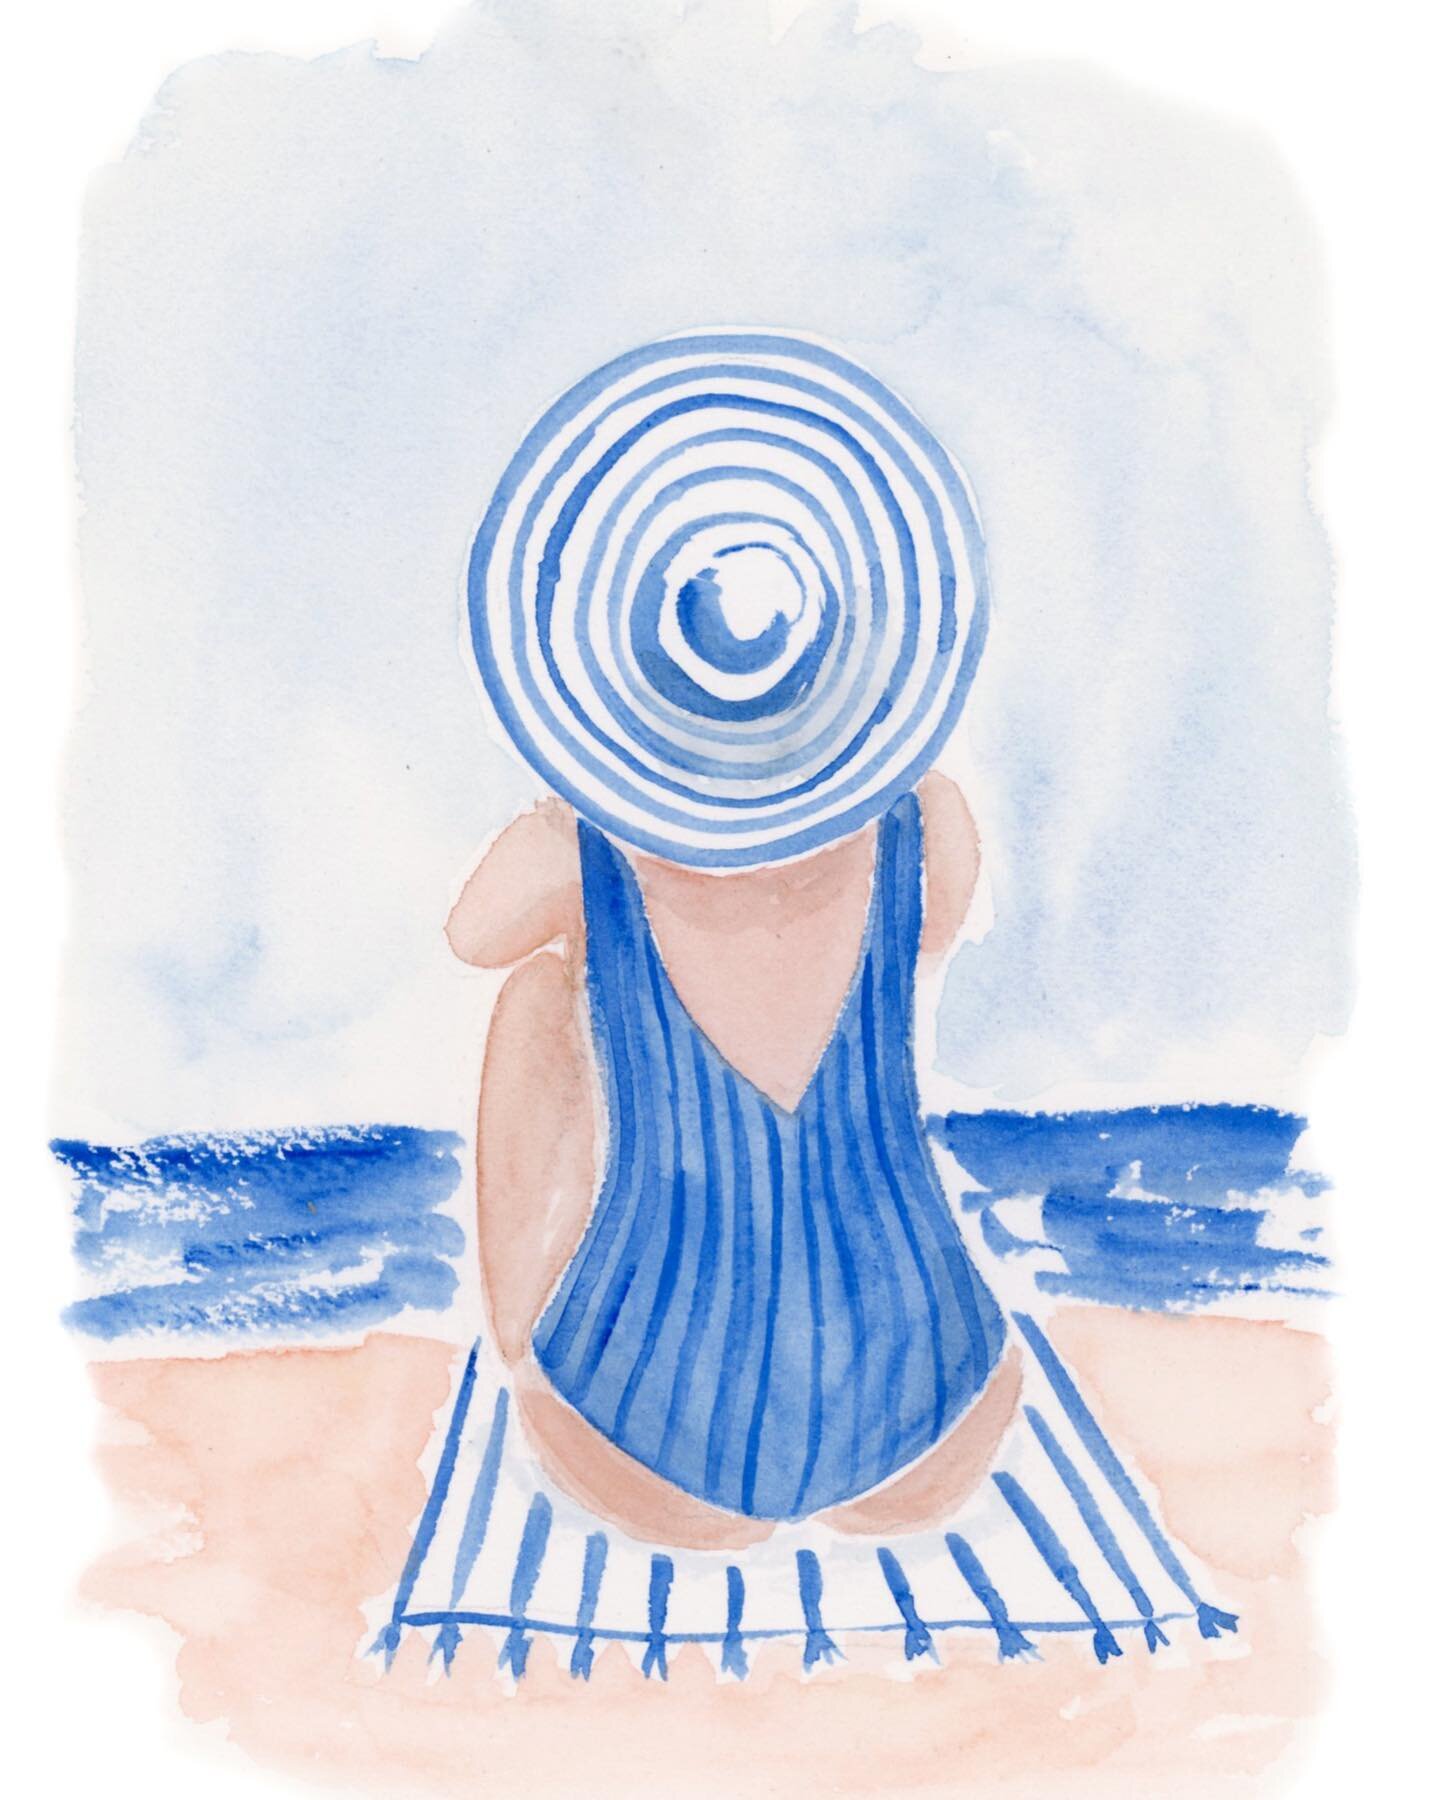 Headed back to the beach today 🌊
We were lucky to rent our house out to a wonderful family for the past 6 weeks but I can&rsquo;t wait to get back out there and soak up the final days of summer.
.
.
#beachbum #watercolor #illustration #westhampton #